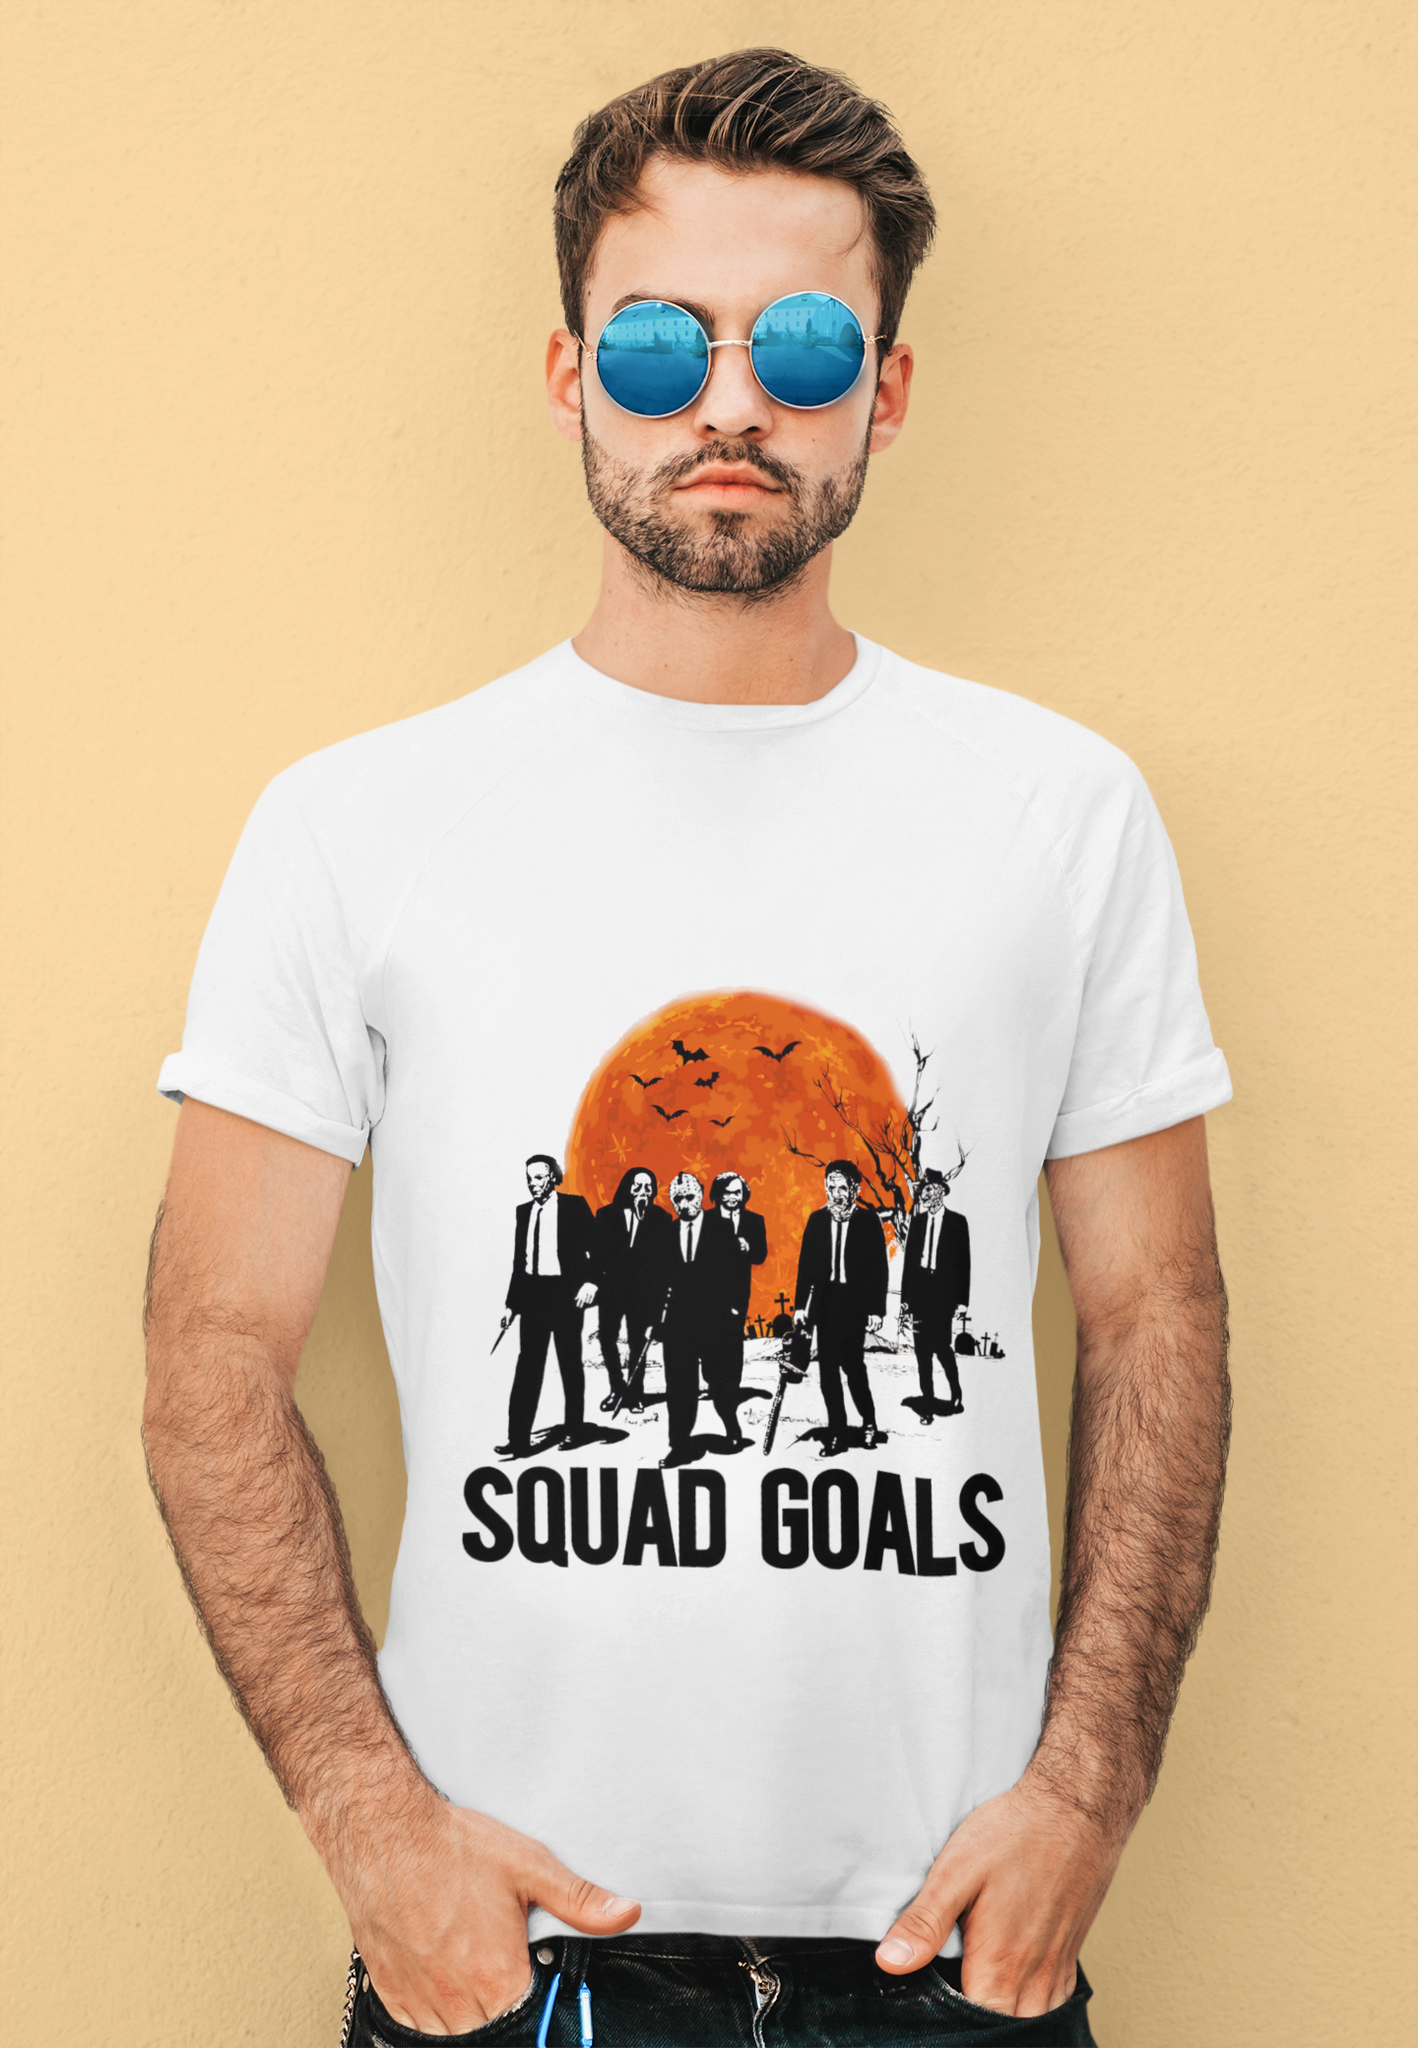 Horror Movie Characters T Shirt, Squad Goals Tshirt, Chucky Michael Myers T Shirt, Halloween Gifts